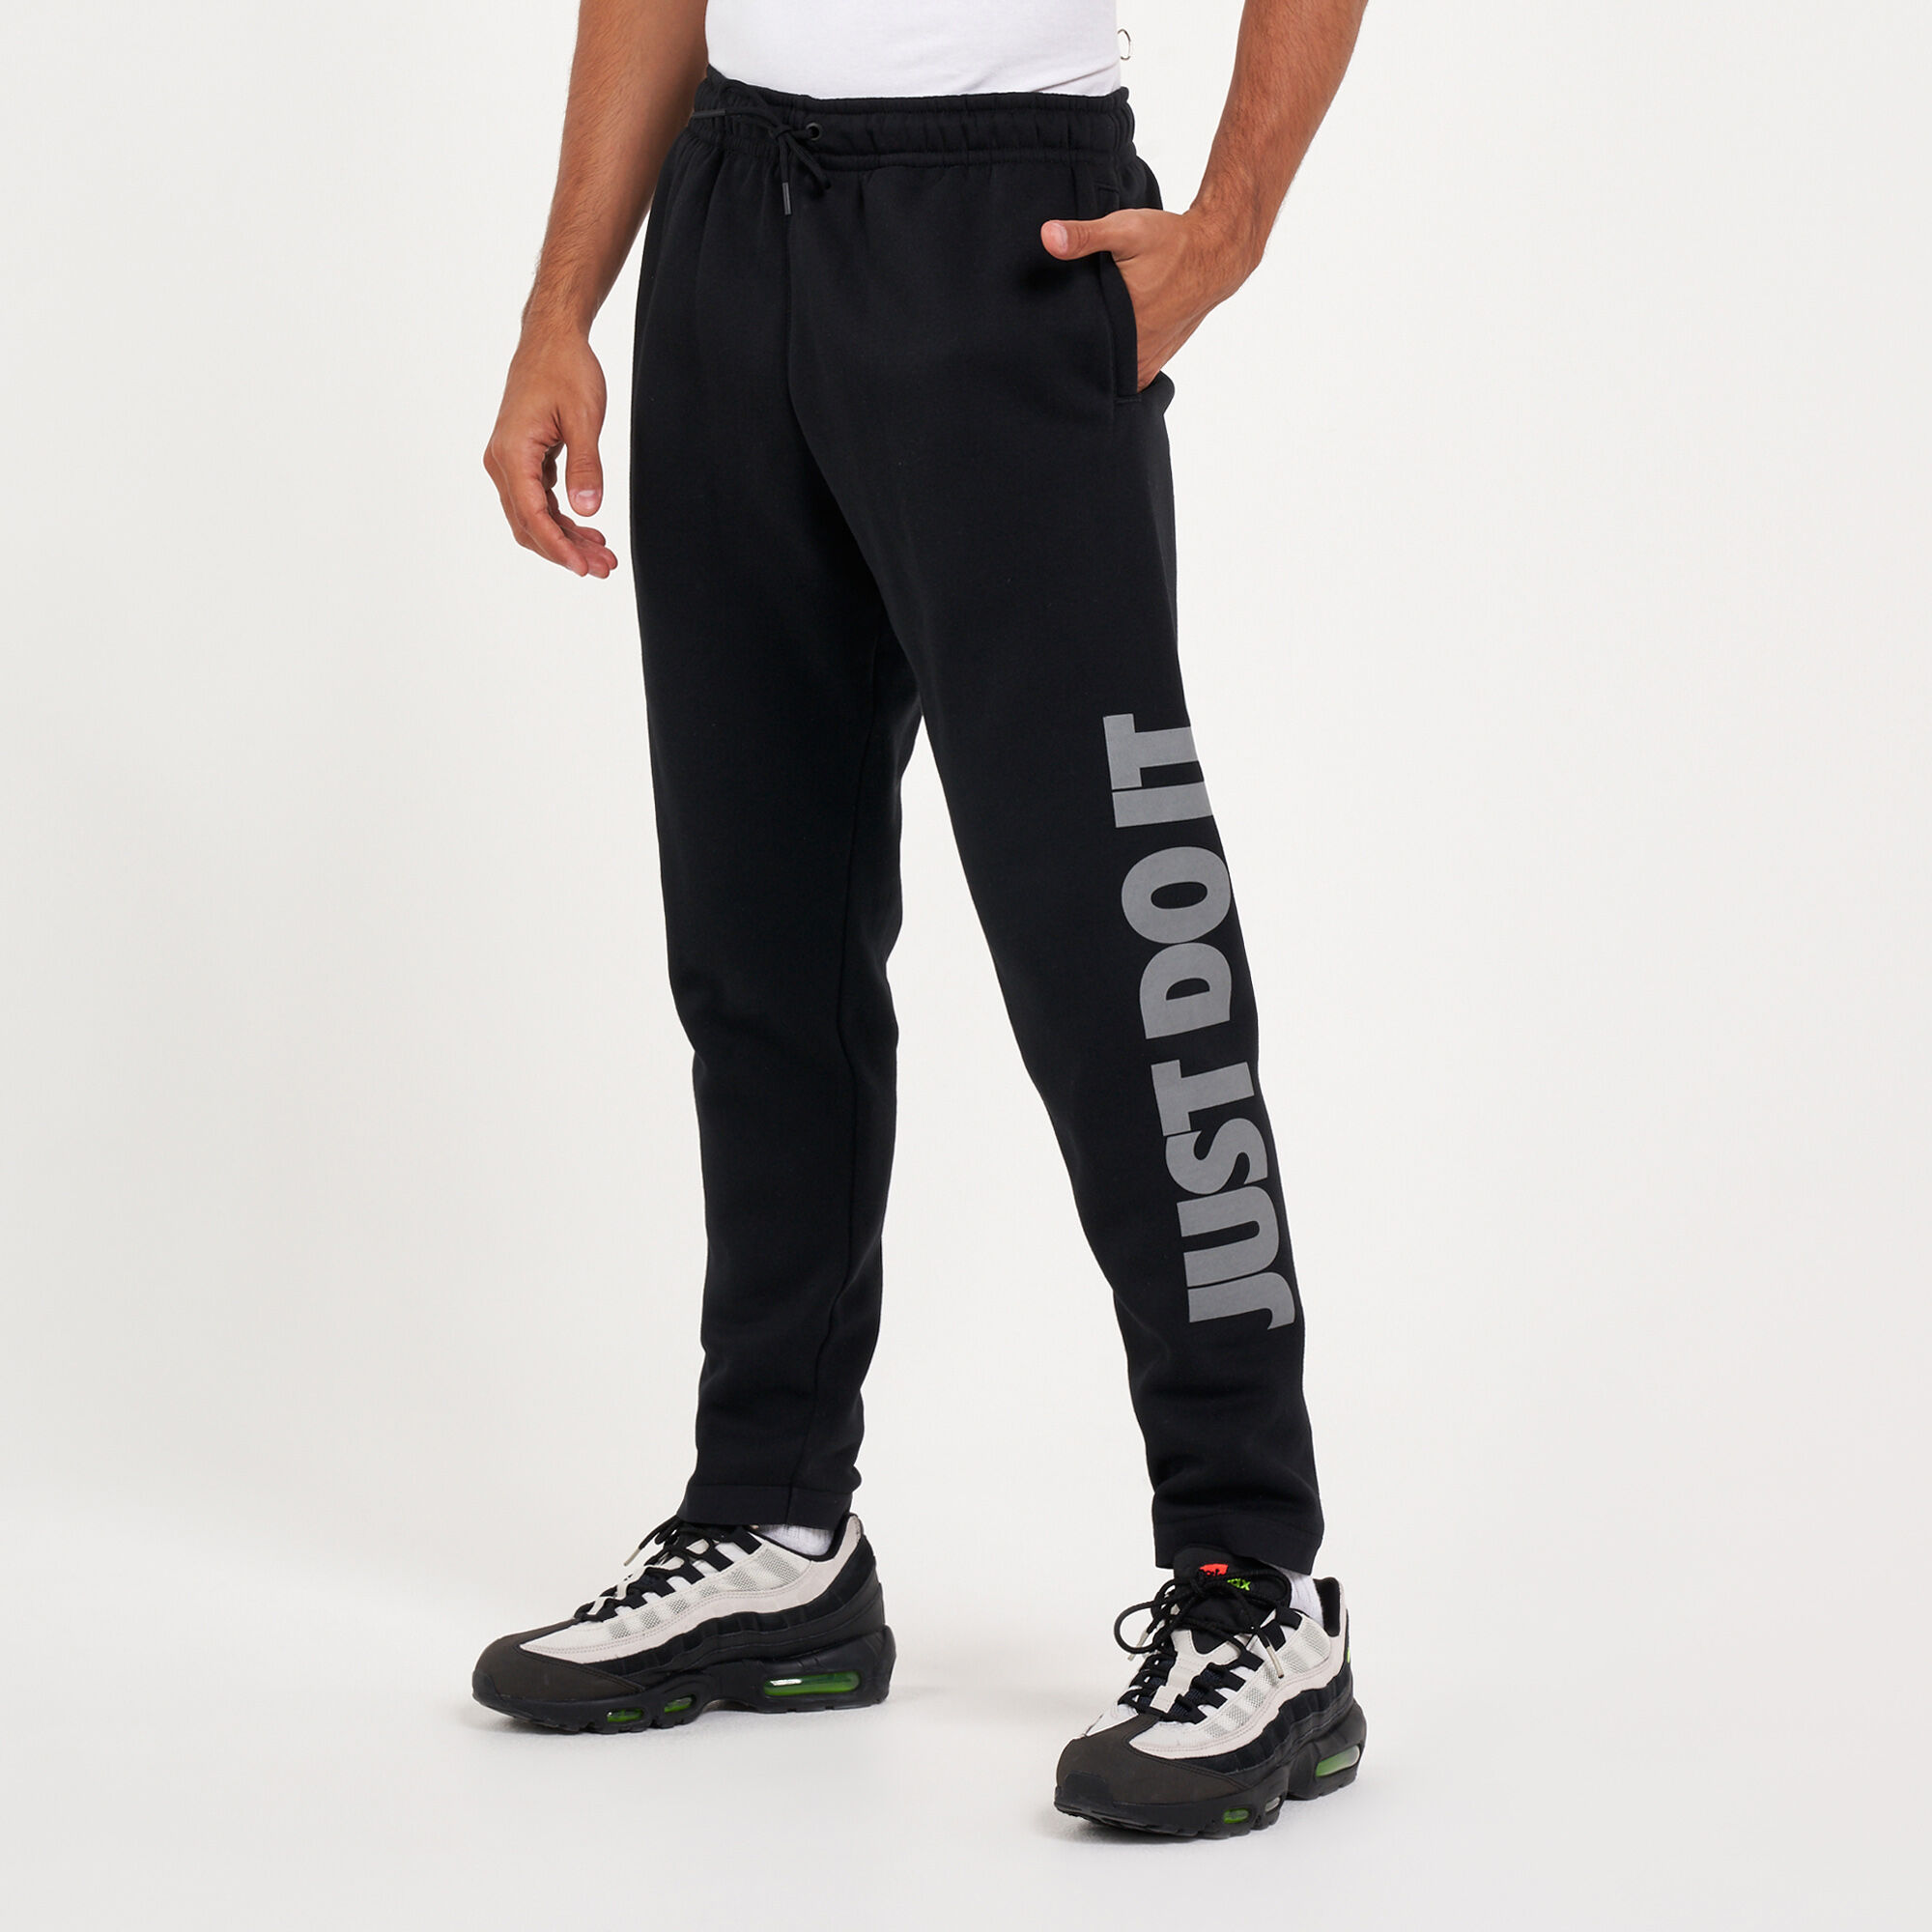 NIKE SPORTSWEAR JUST DO IT WOVEN PANTS black and white  AW LAB